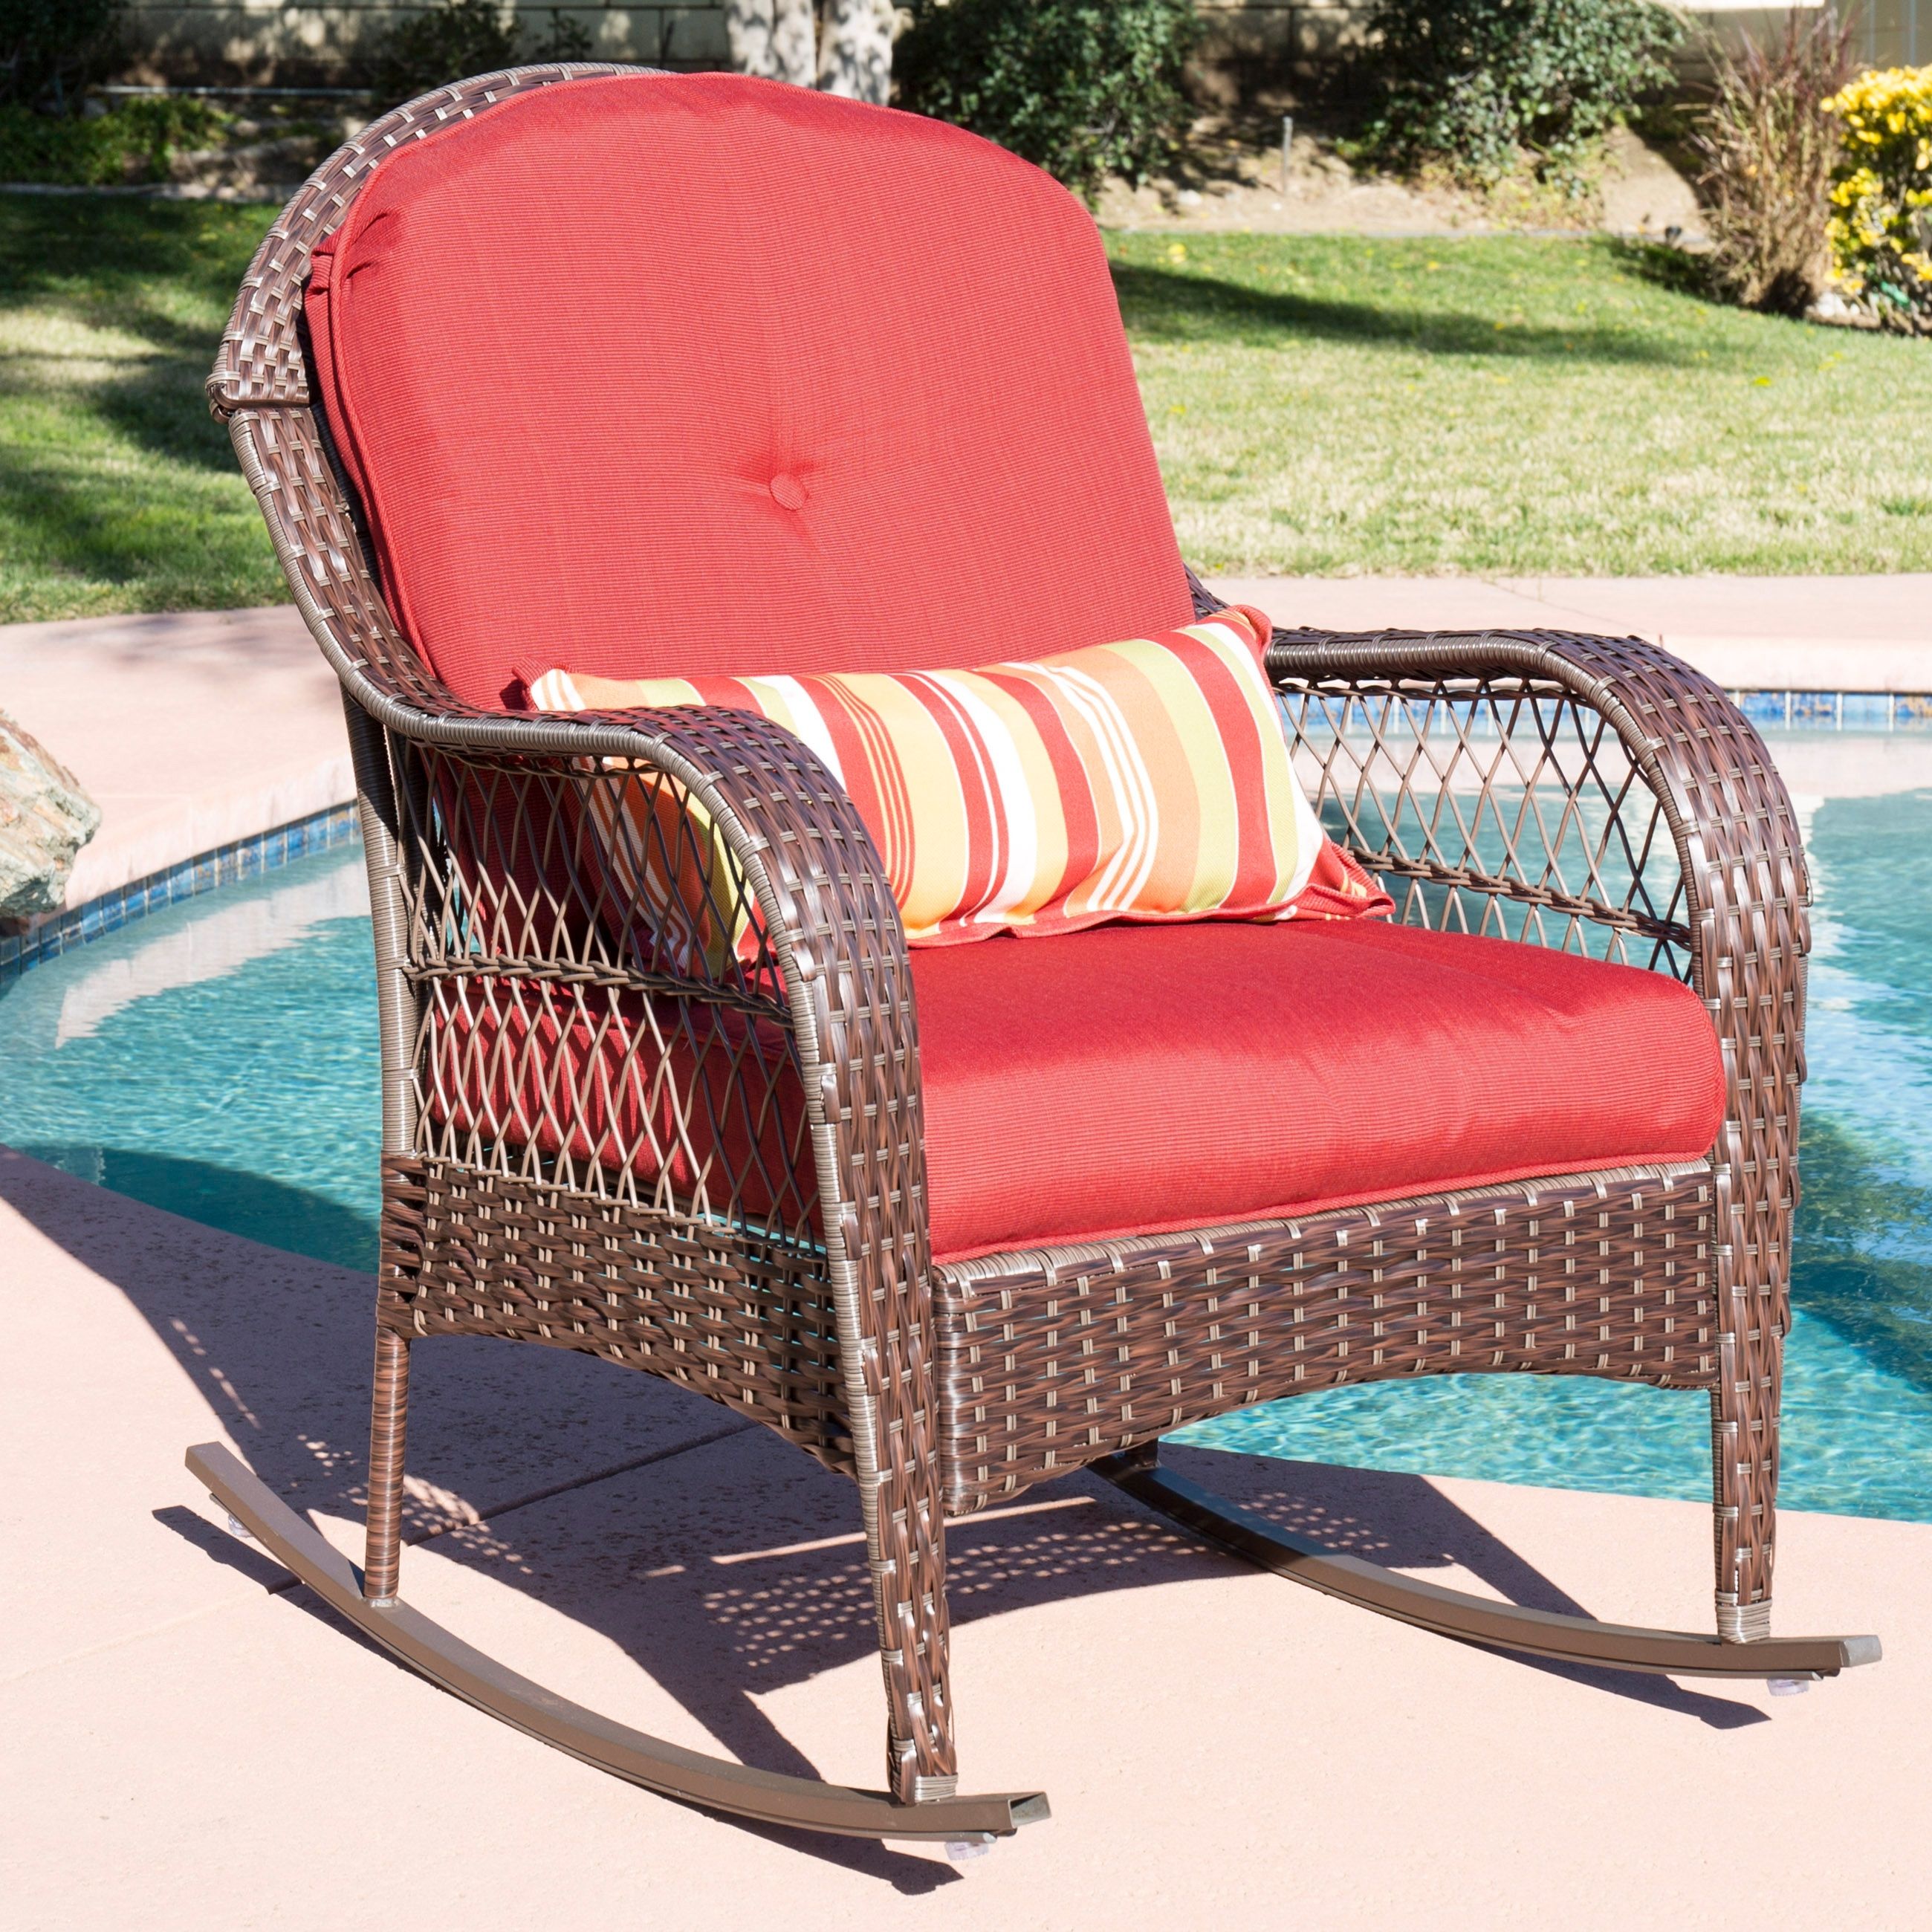 Outdoor Wicker Rocking Chairs With Cushions With Current Best Choice Products Wicker Rocking Chair Patio Porch Deck Furniture (View 4 of 15)